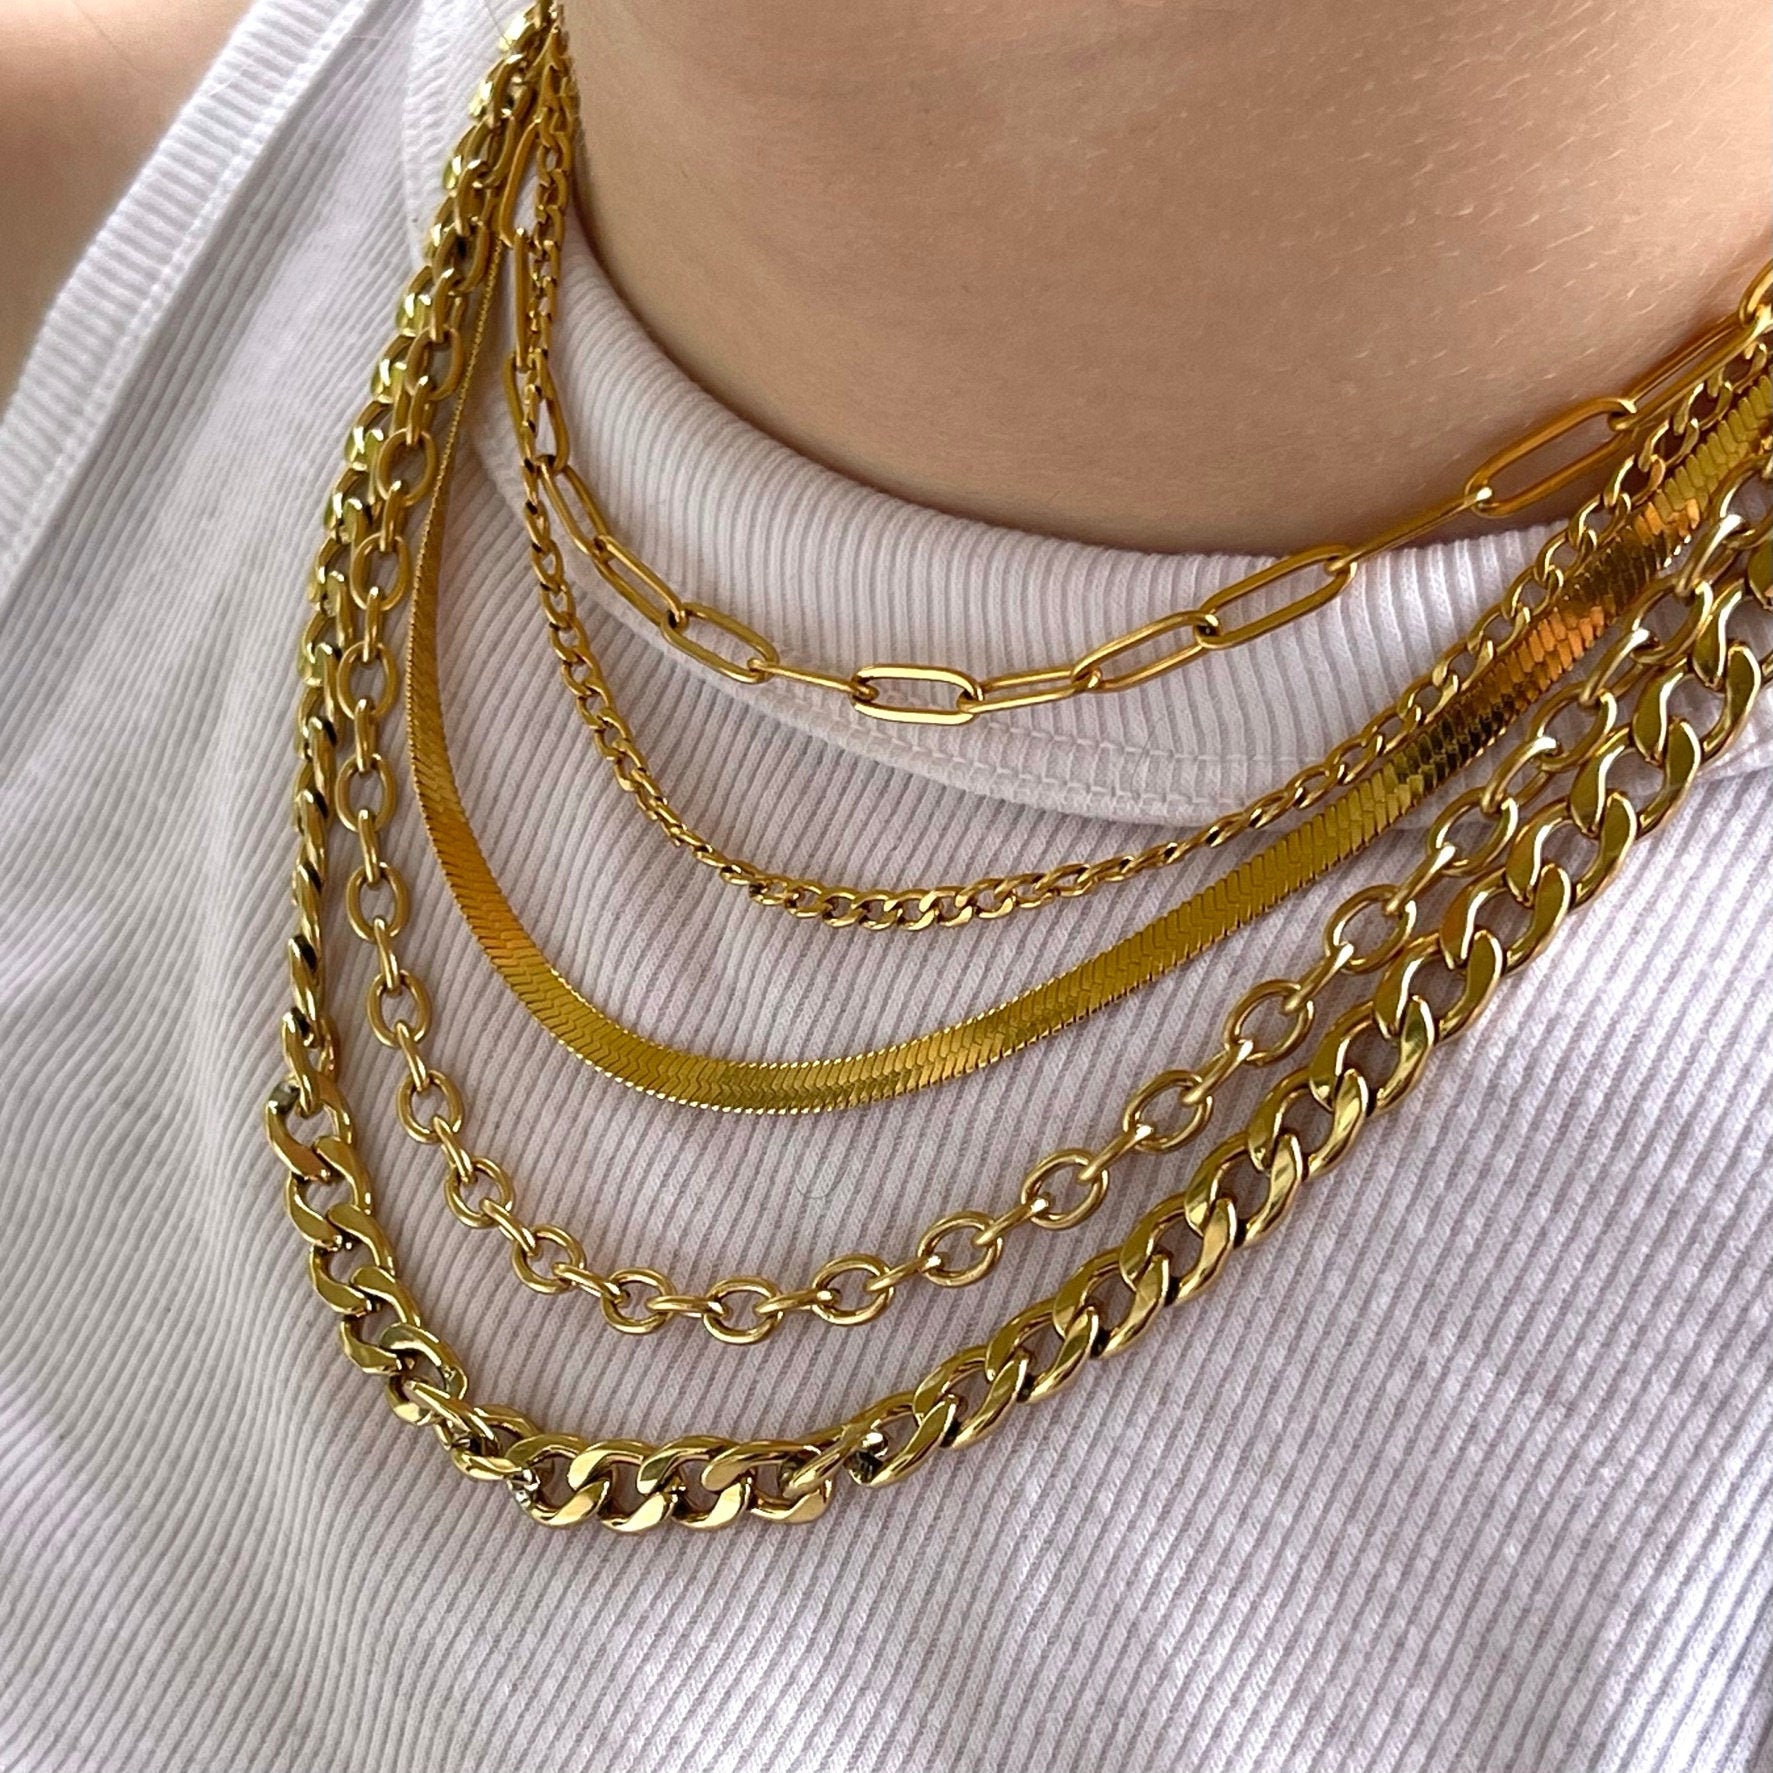 Gold Chain Necklace - Waterproof Necklace - Gold Necklace Women - Choker Necklace - Paperclip Chain - Twist Rope Chain - Curb Link Chain